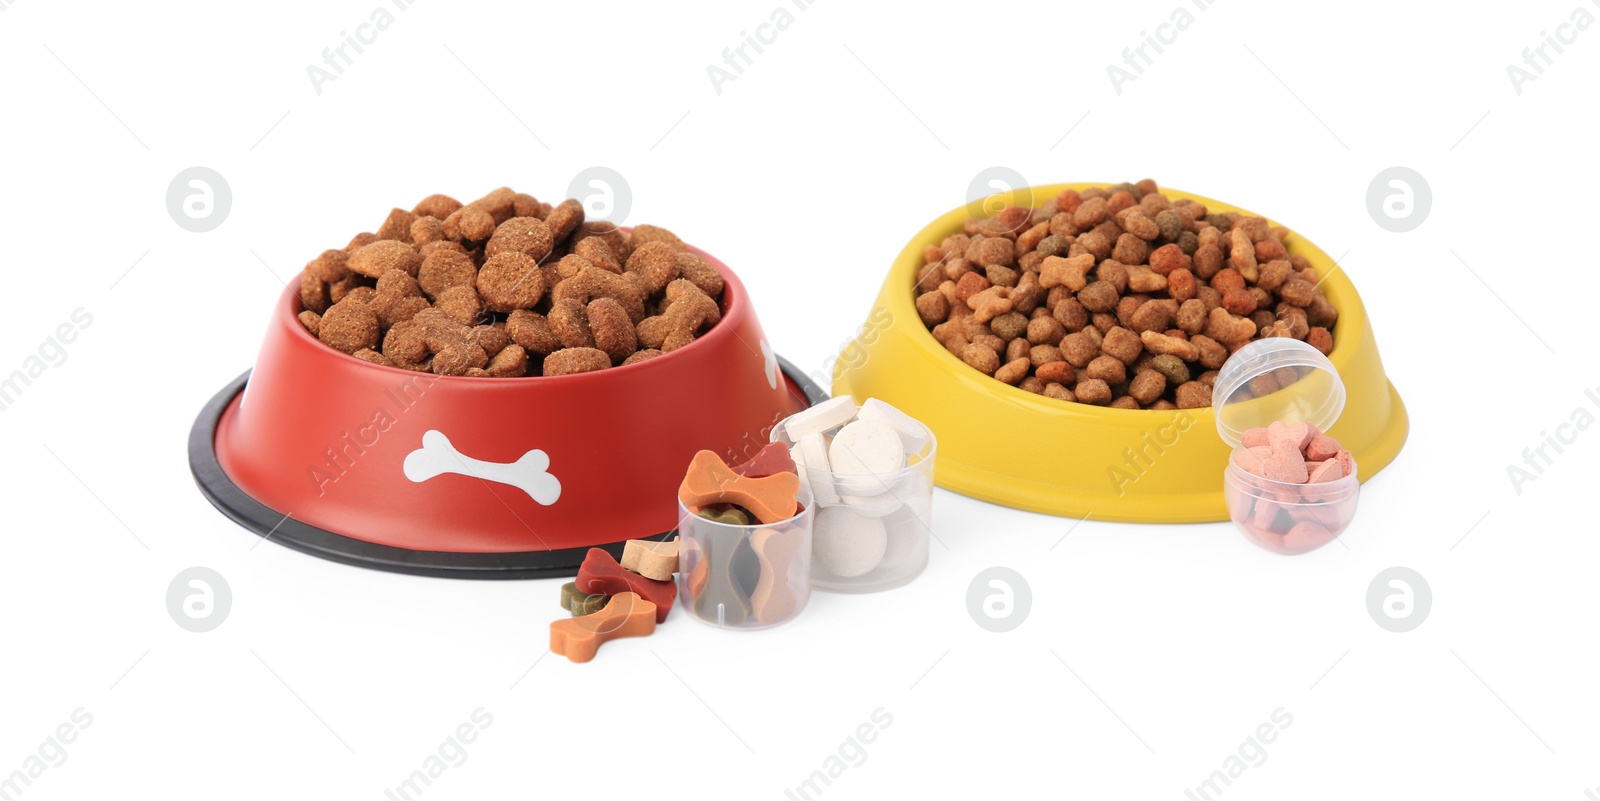 Photo of Dry pet food and vitamins isolated on white